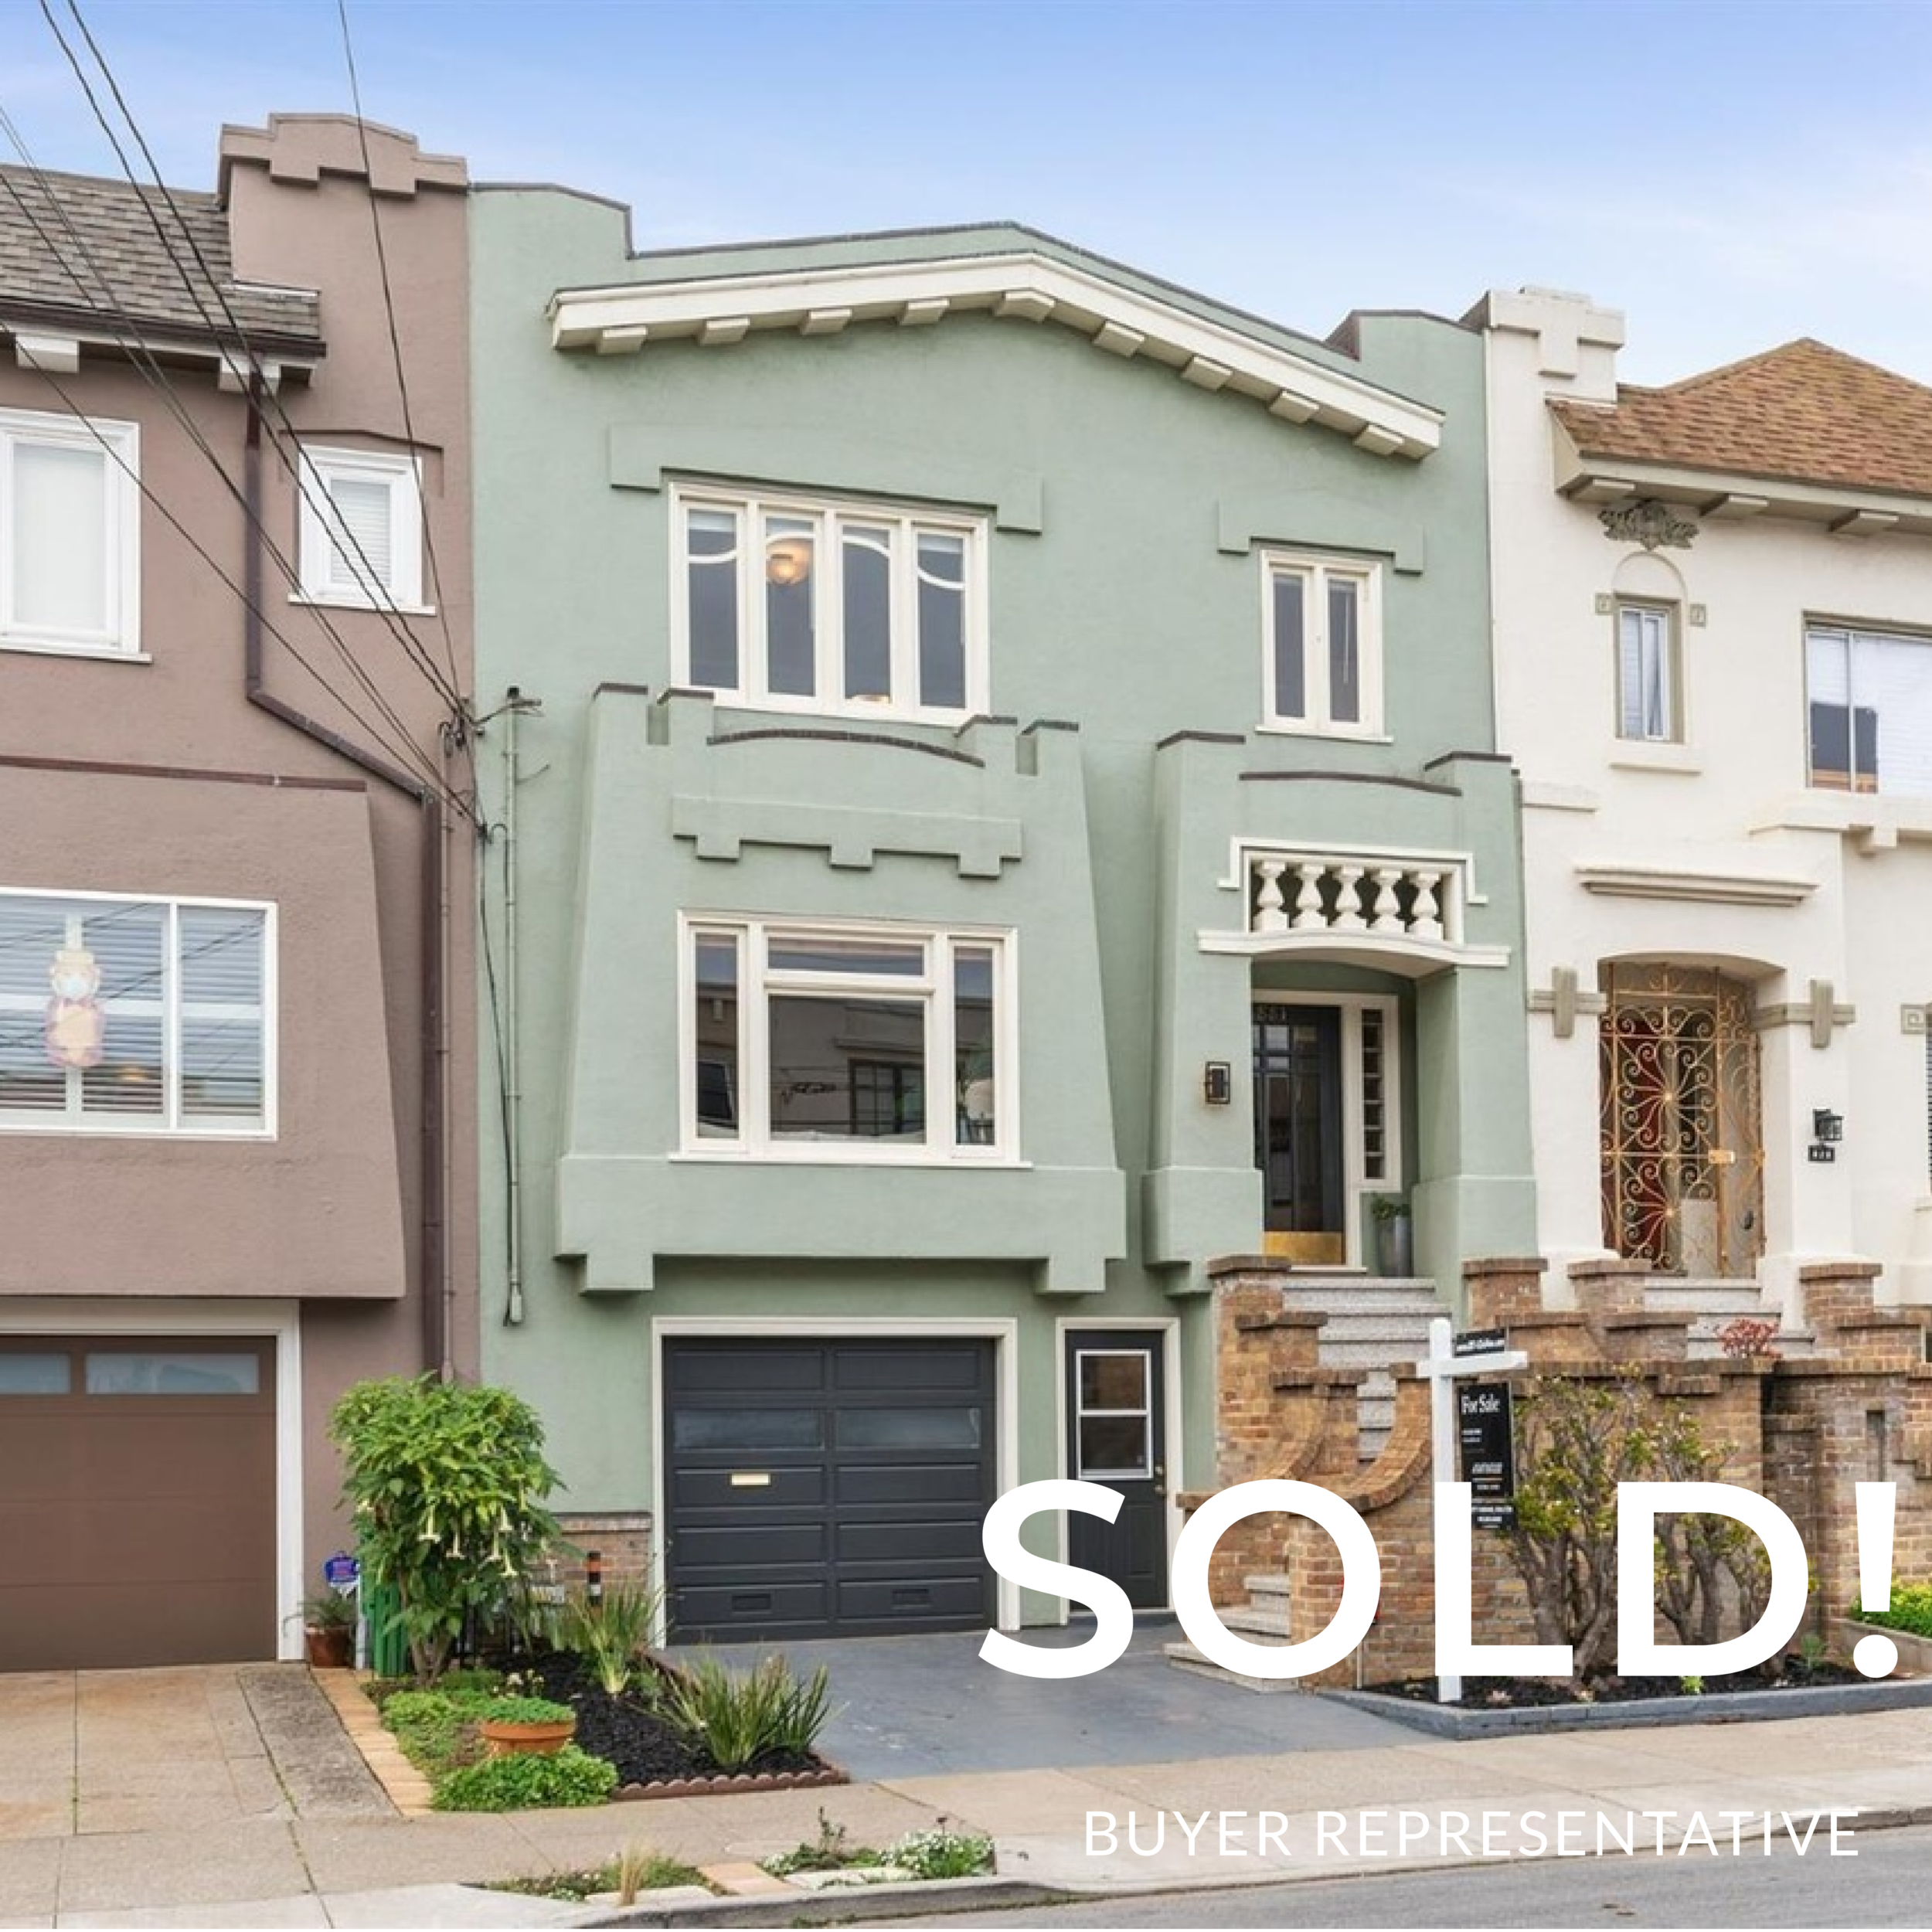 Sold! Instagram Post - 43rd ave.png